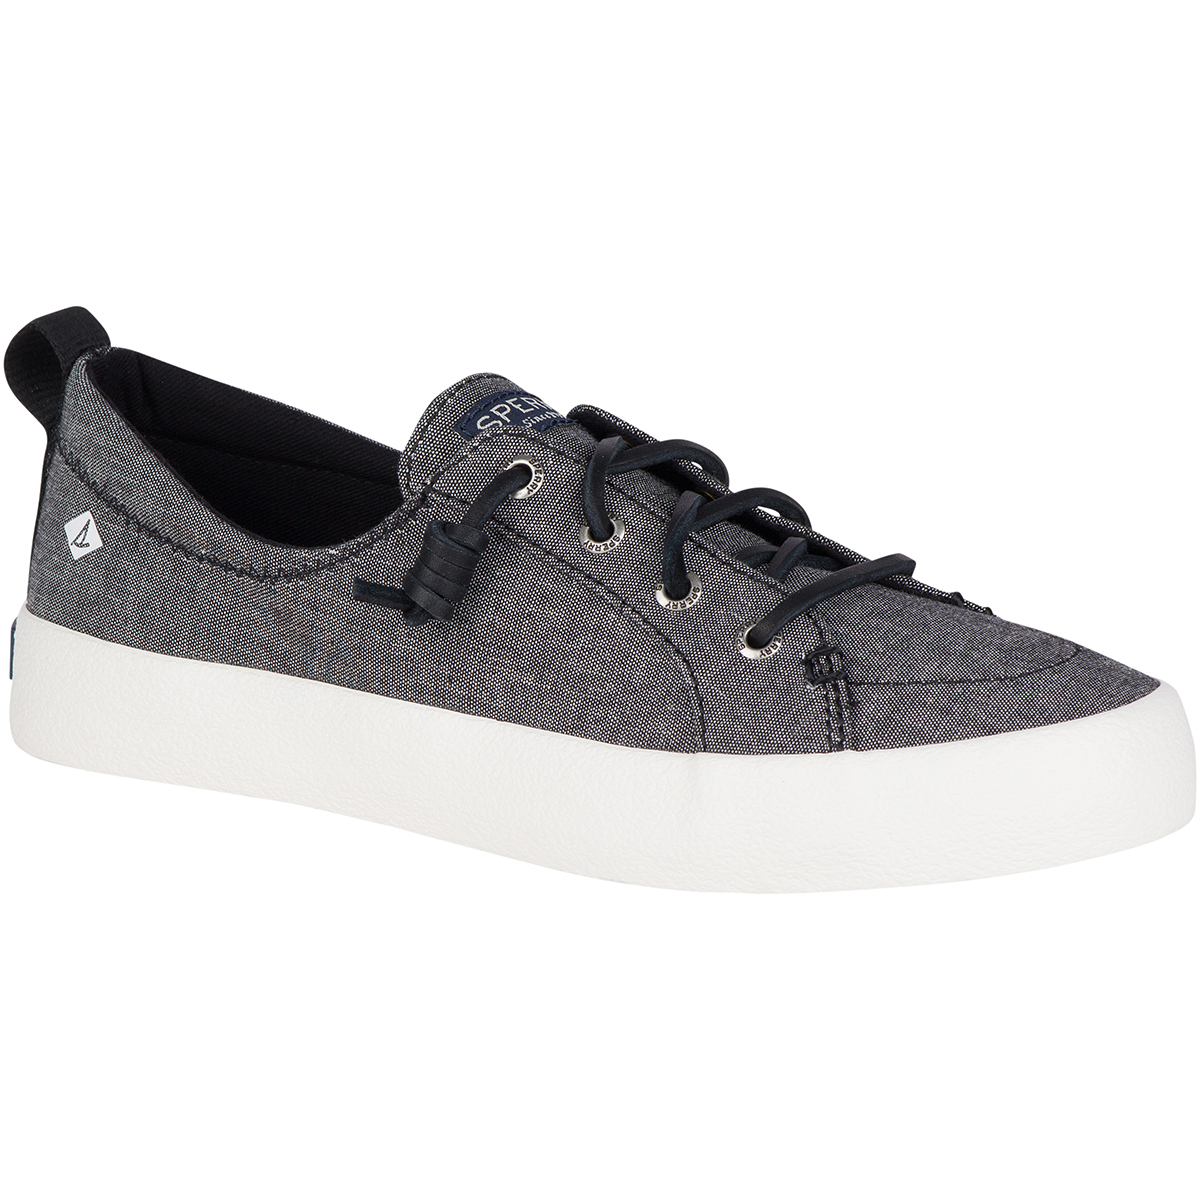 Crest Vibe Crepe Chambray Boat Shoes 